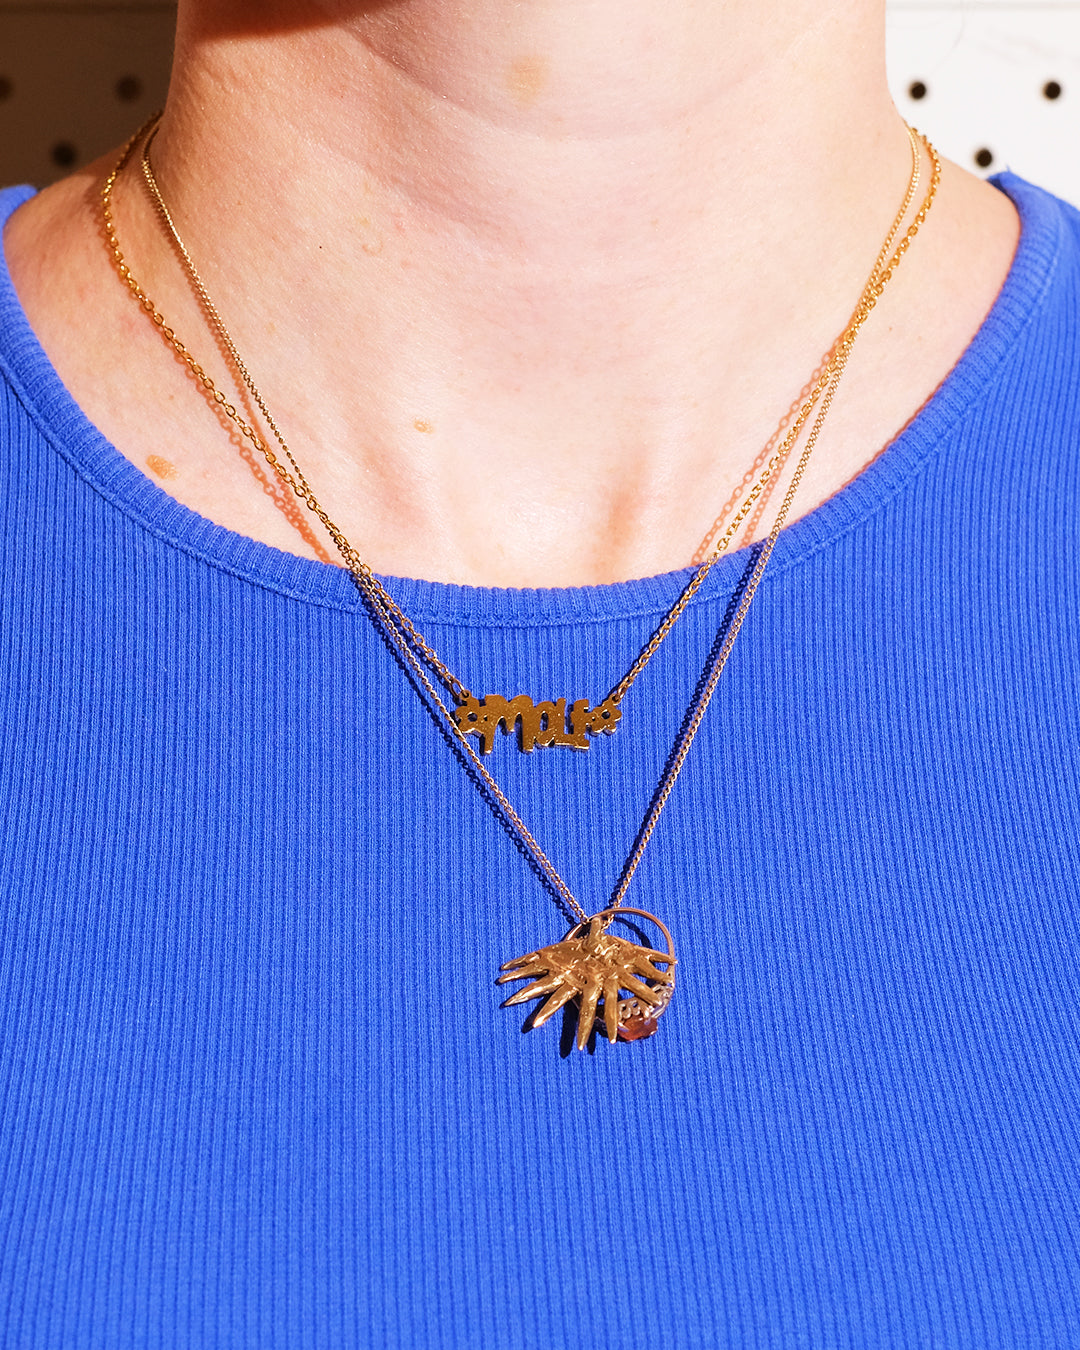 Mole - Gold Nameplate Necklace